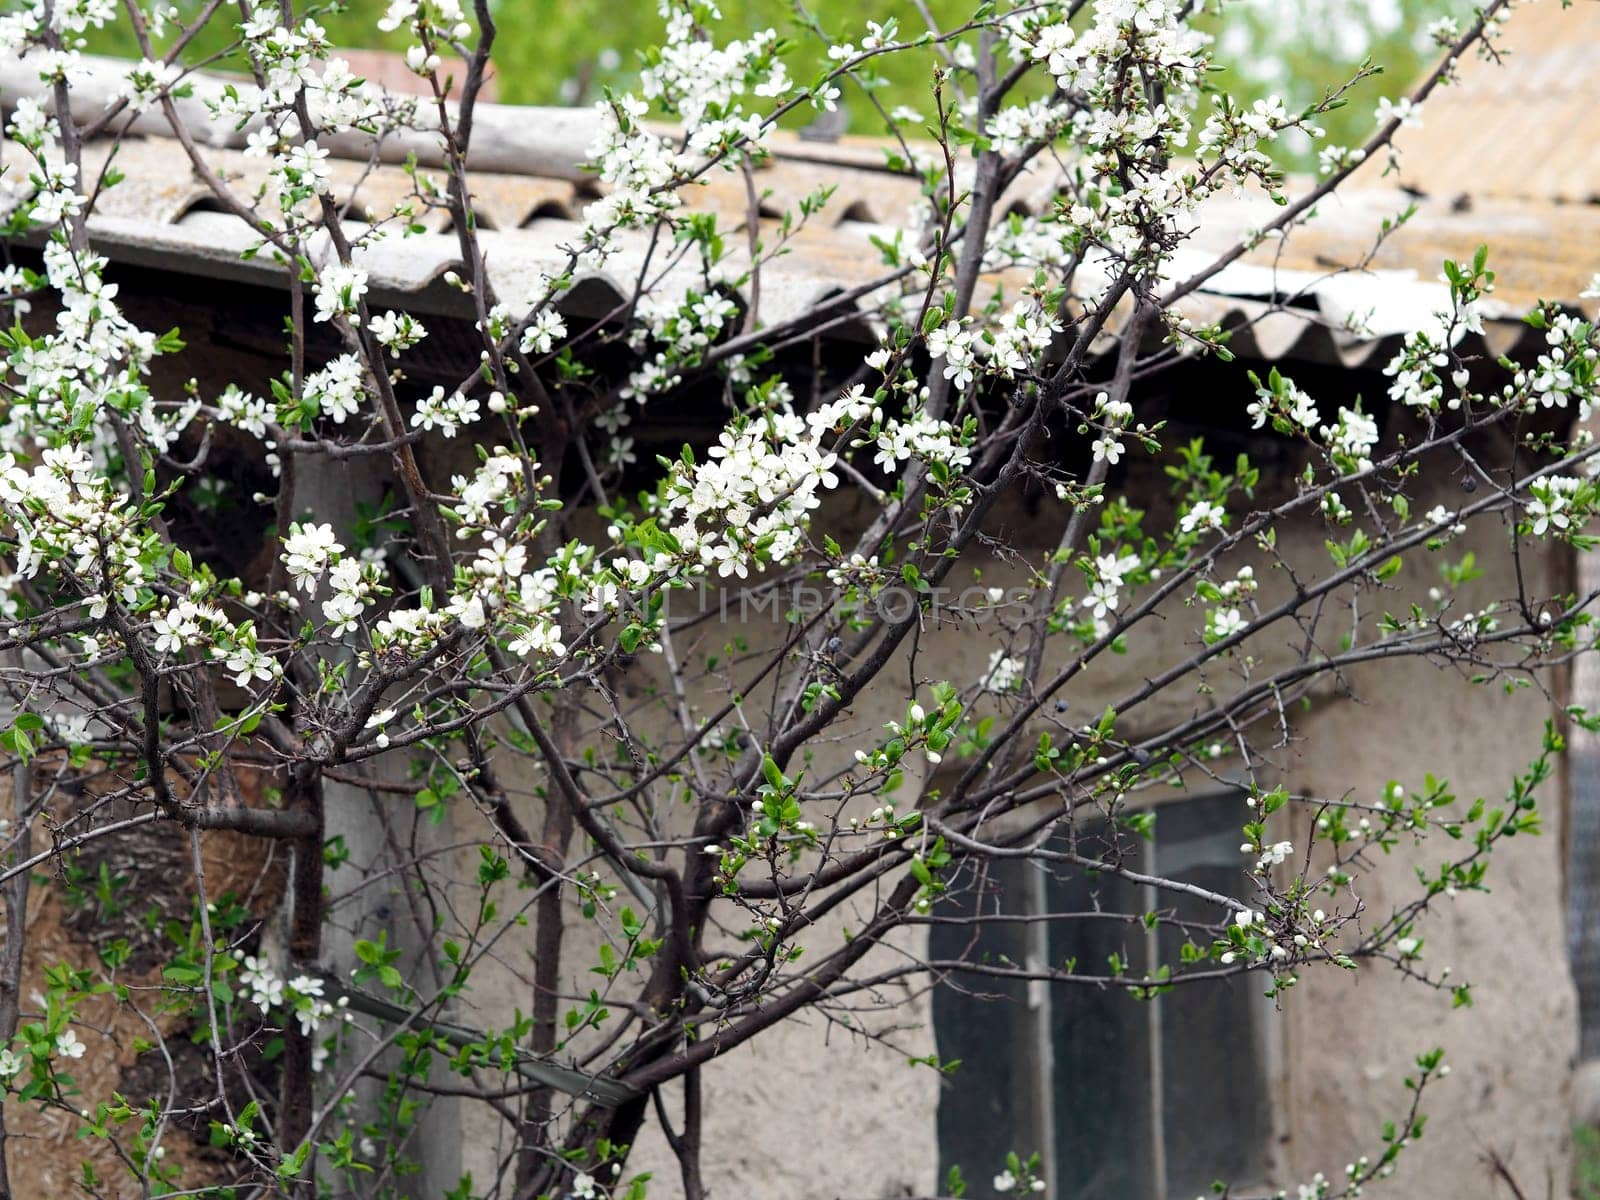 Spring and blossoms against the backdrop of a ruined house. Life goes on. White flowers on the fruit trees. The ruined city of Irpin. The war in Ukraine 2022.